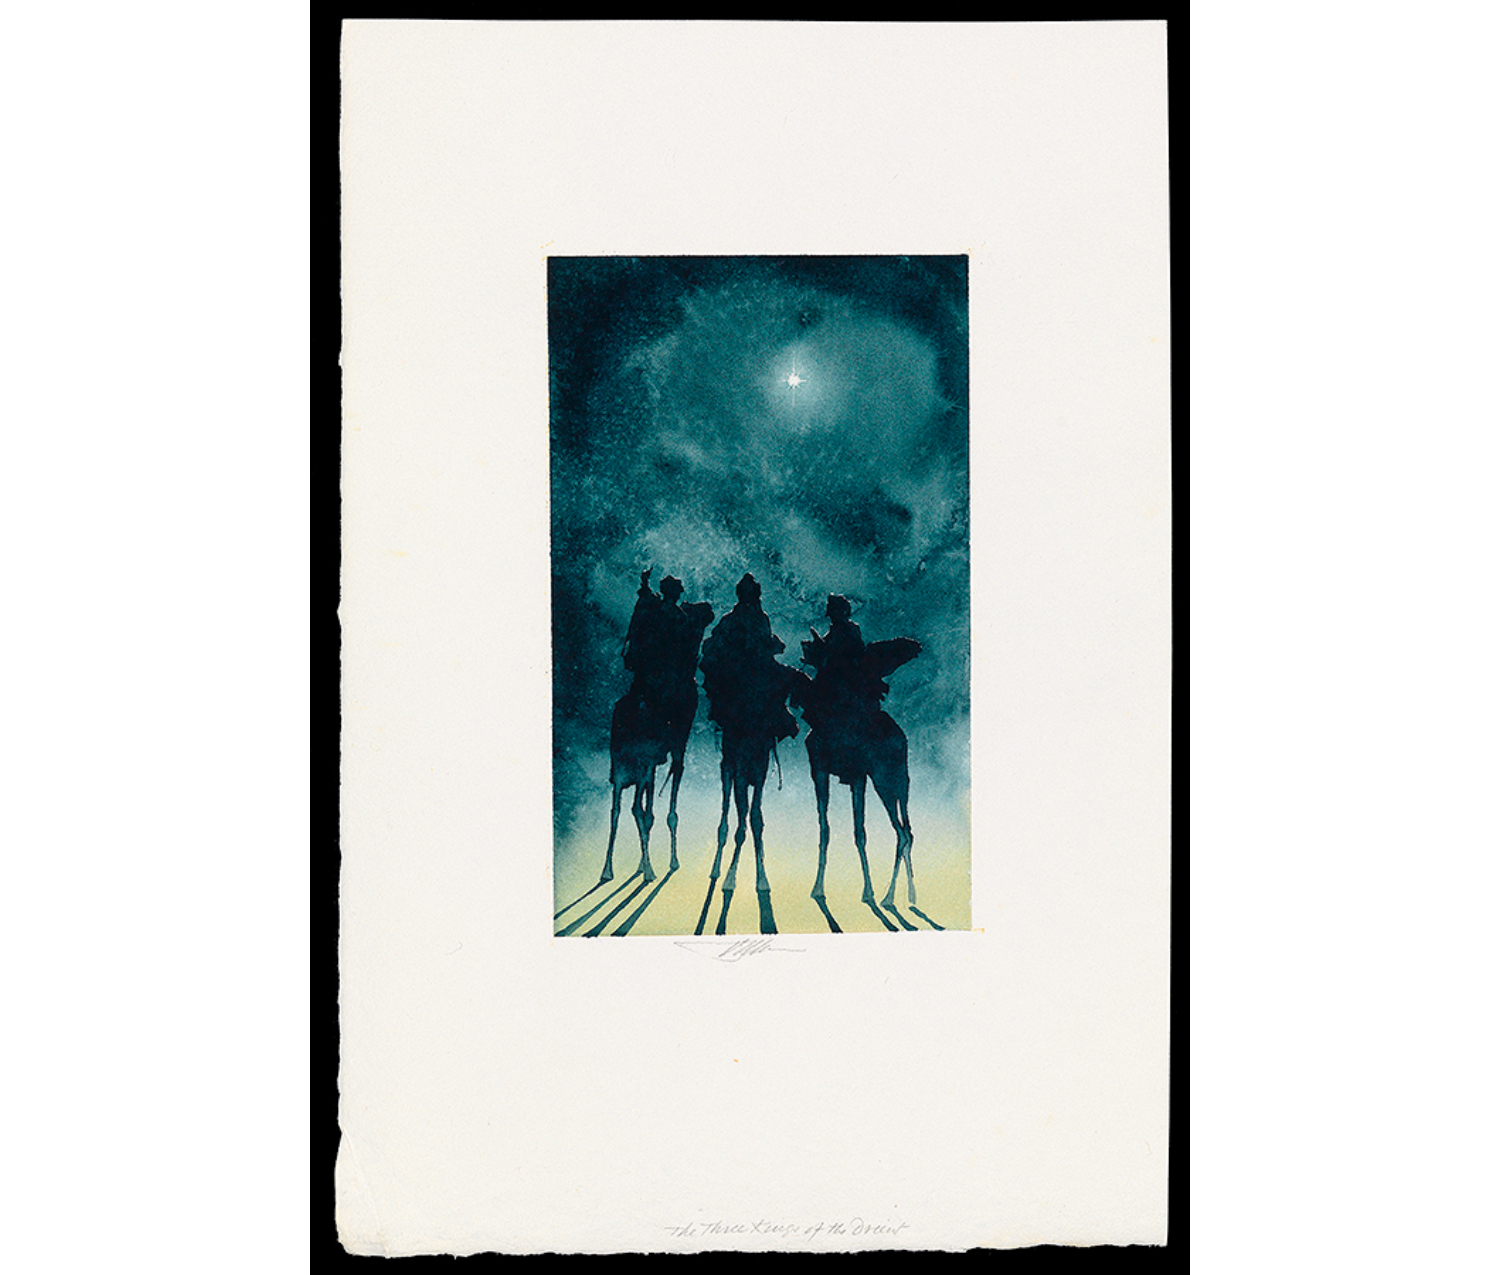 Watercolor of three figures on horseback, looking up at the night sky and the North Star. Figures are black against a dark blue sky and yellow ground.